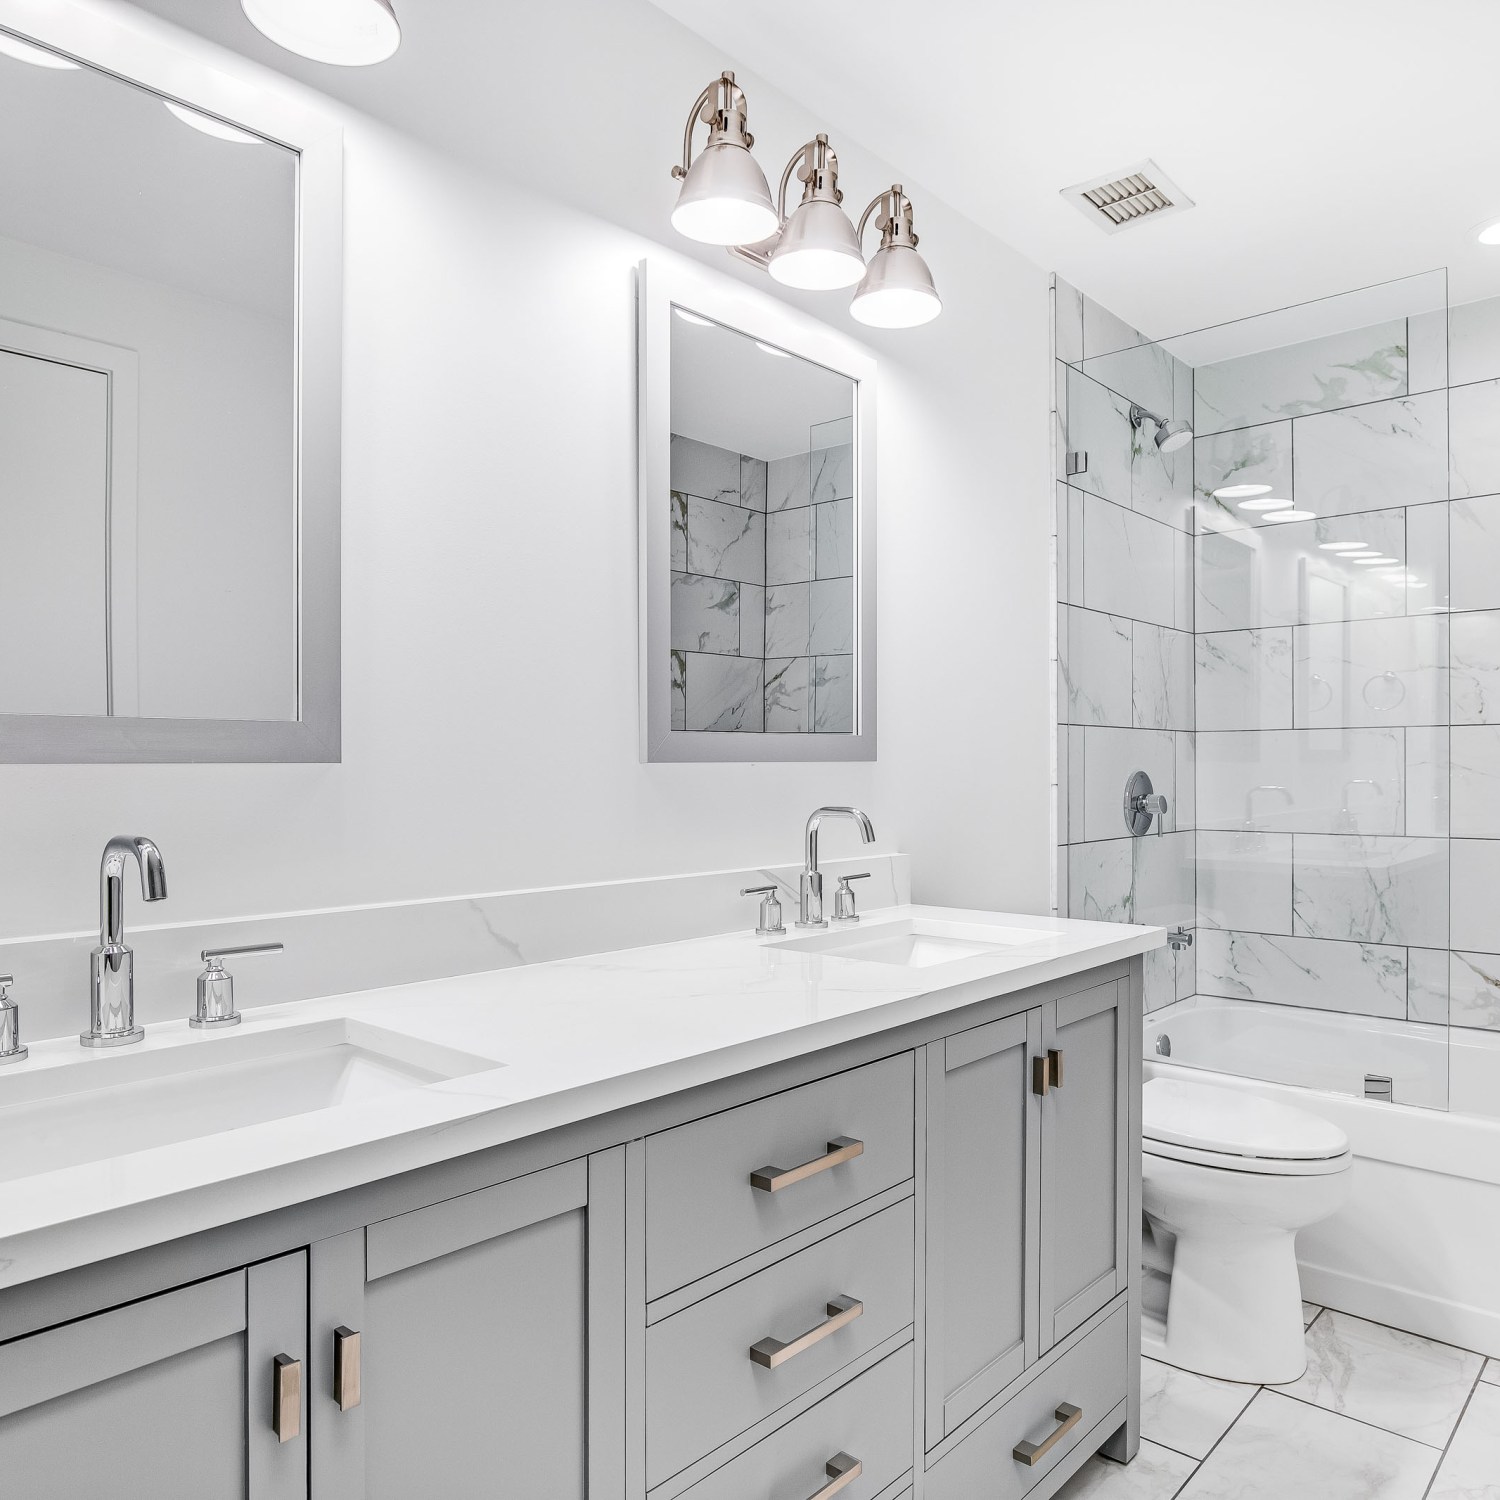 An elegant, easy, clean remodeled bathroom with a grey vanity and bronze hardware.